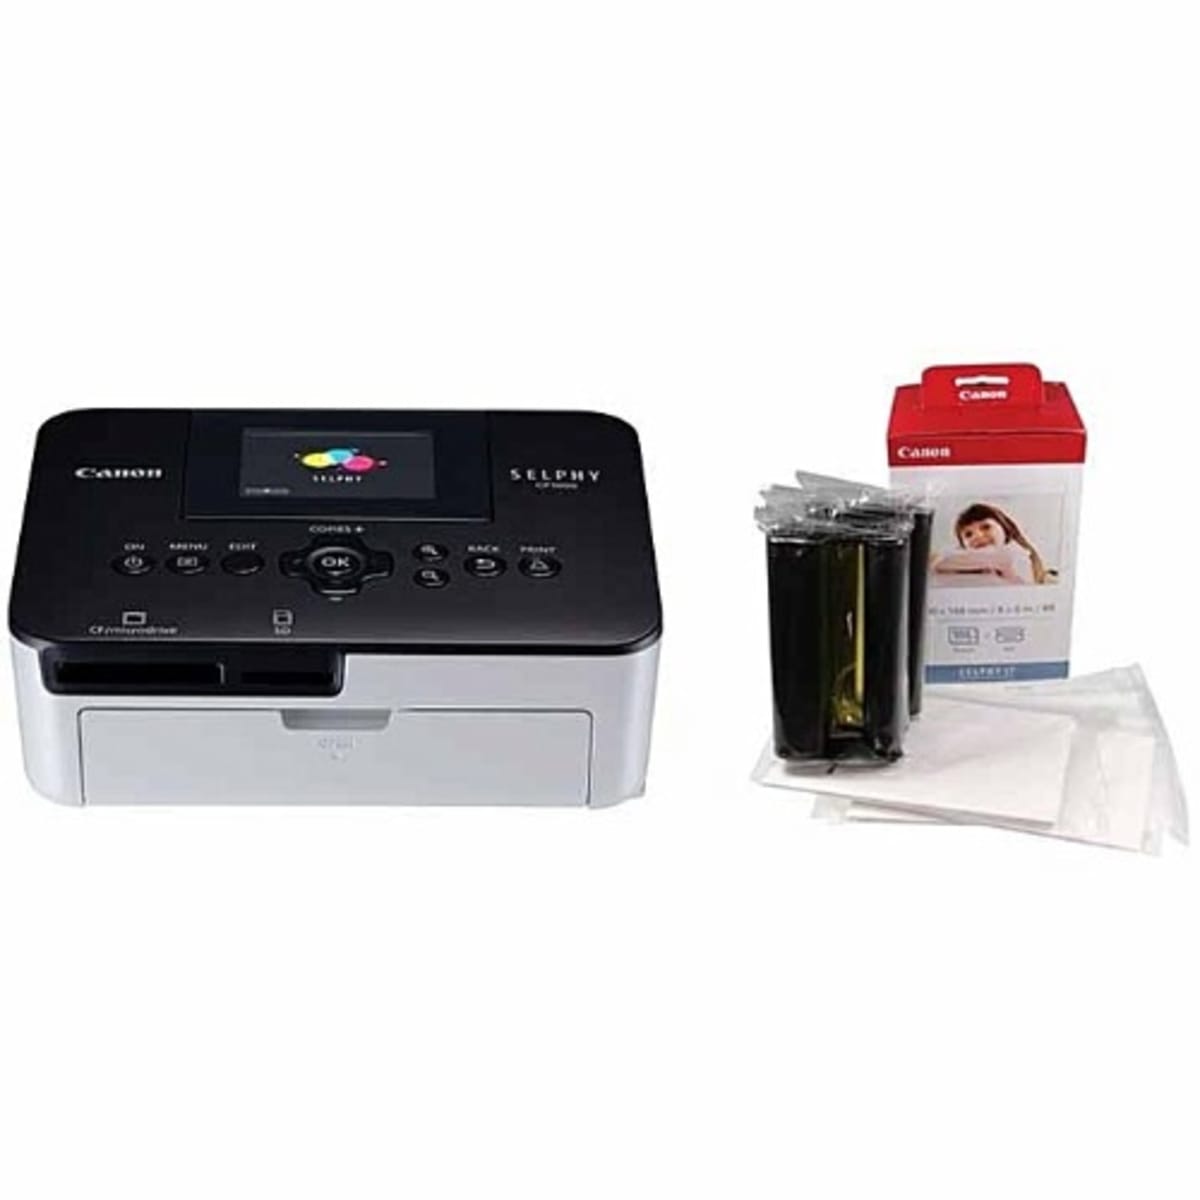 Canon Selphy Cp1000 Photo Printer & Selphy Paper/ink Set Combo